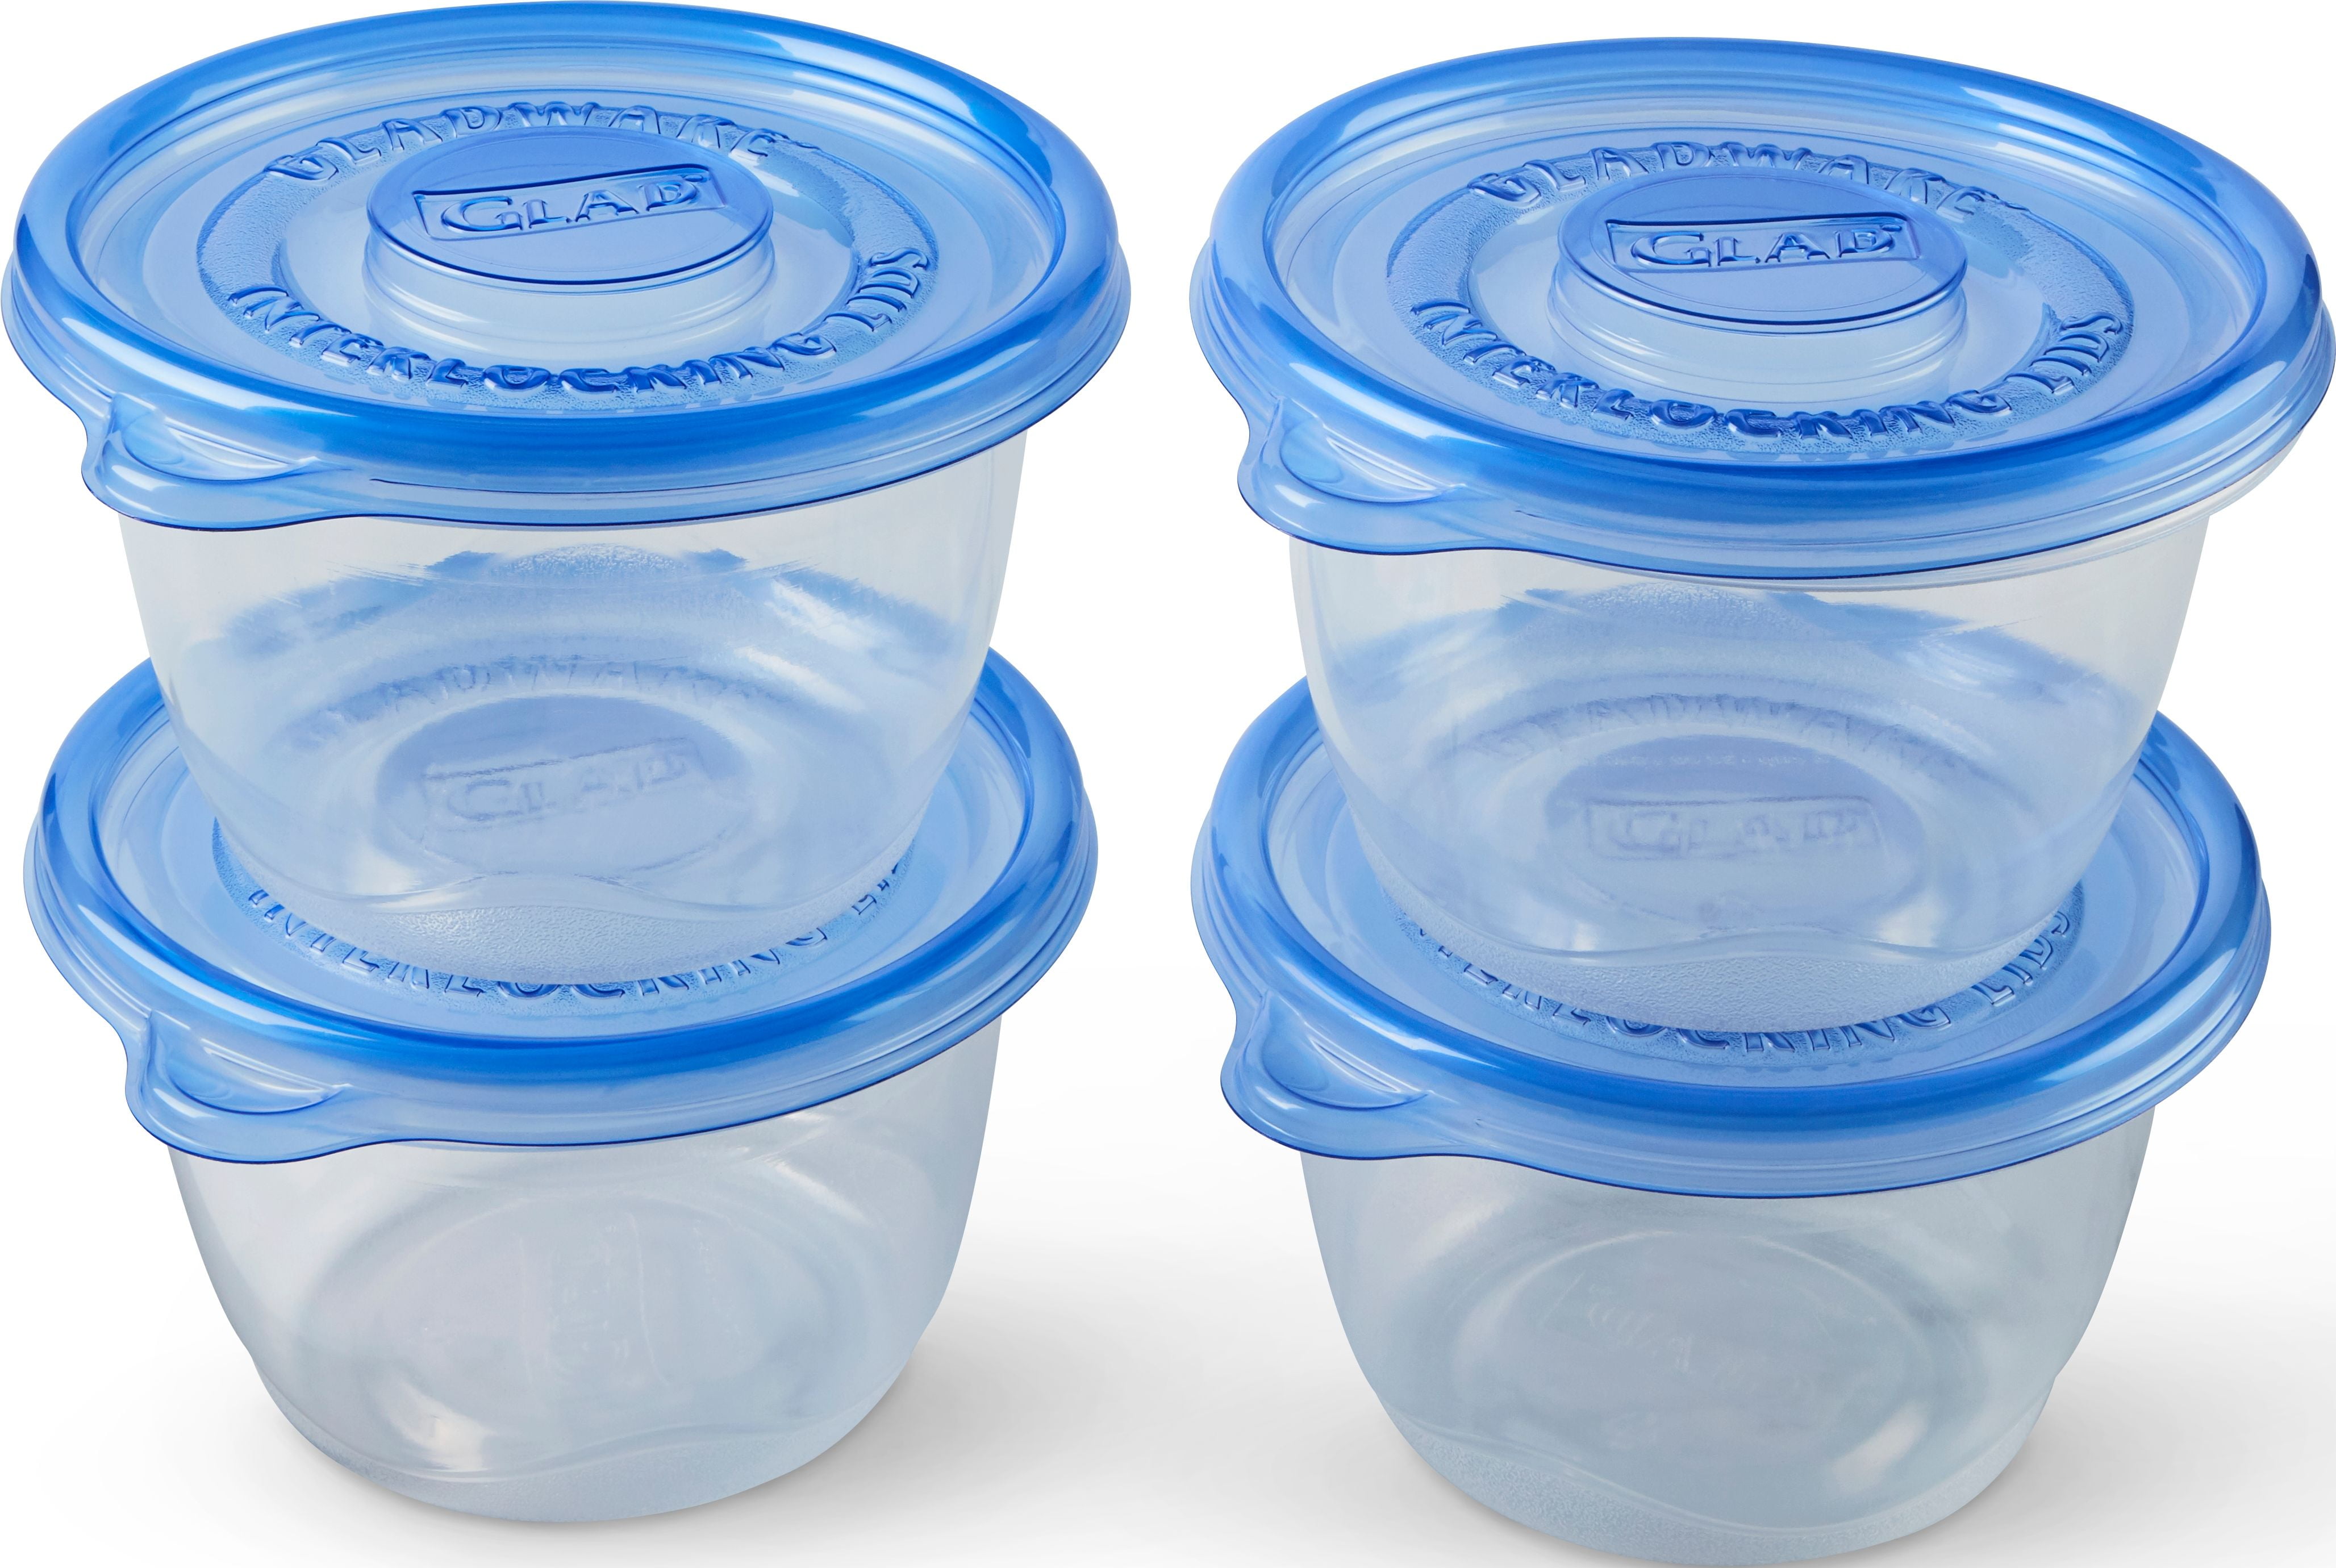 Glad® GladWare® Plastic Containers with Lids - Candor Janitorial